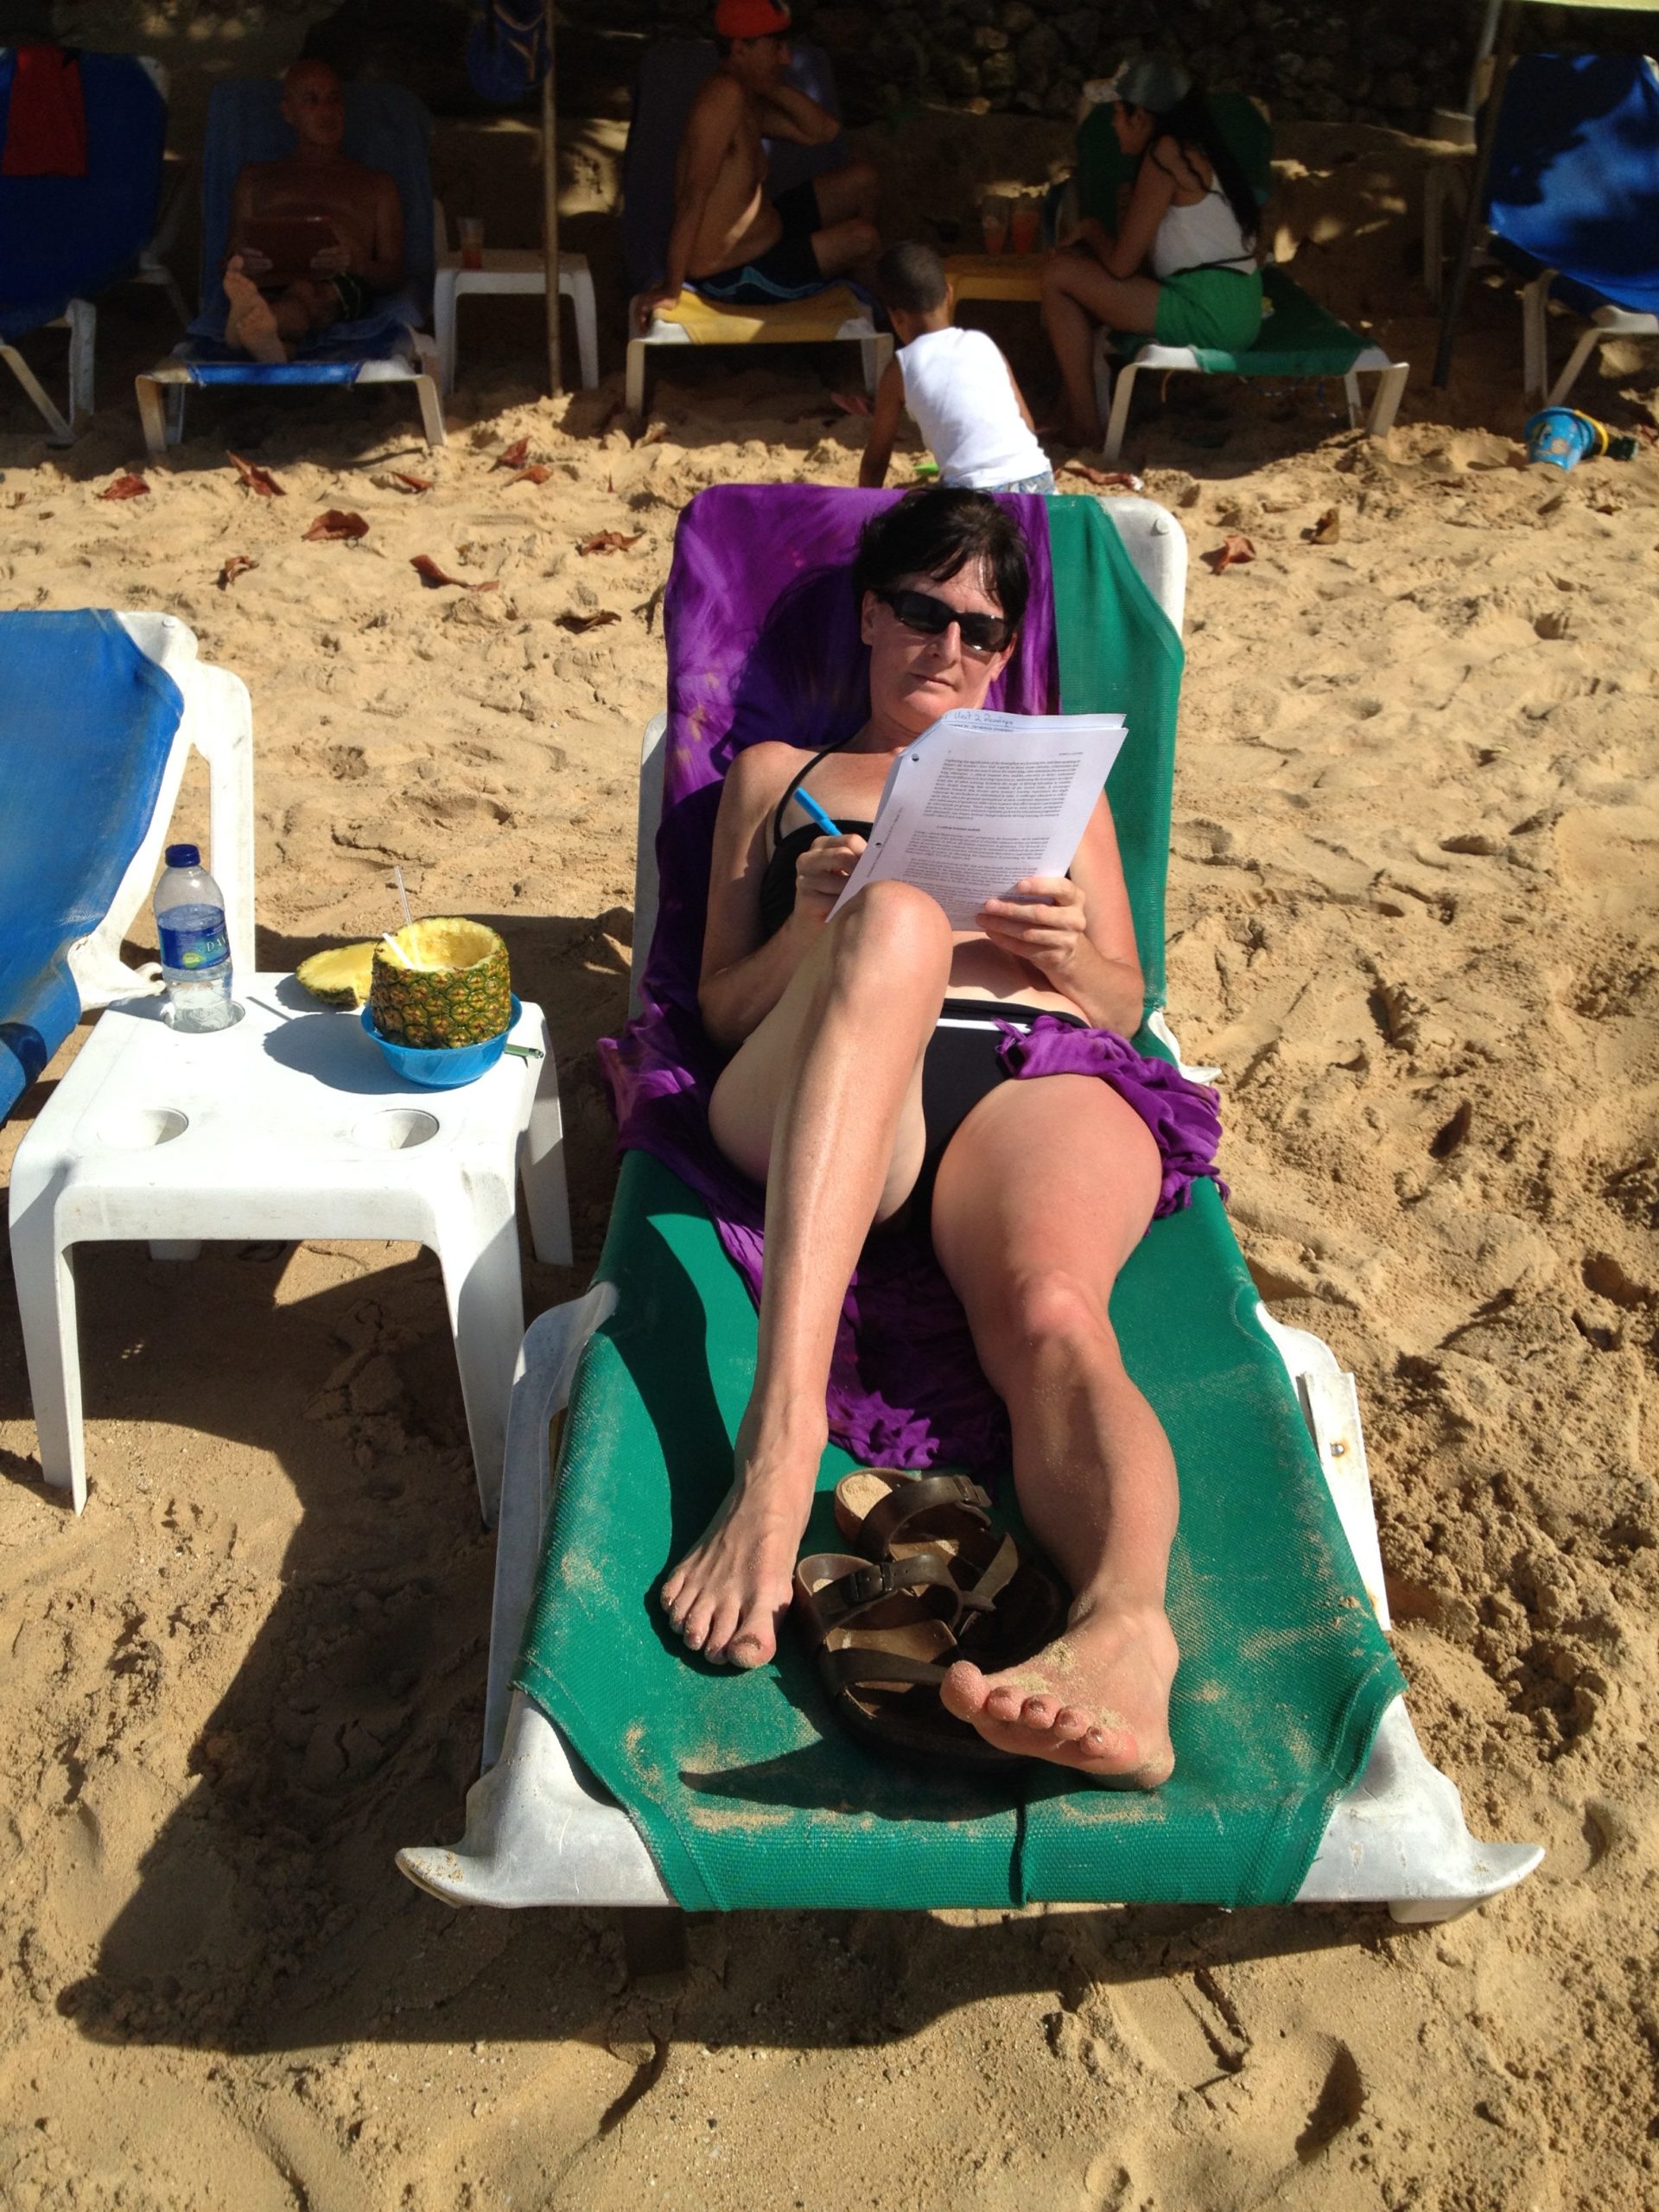 Mary Shier sitting in a lounge chair in her bathing suit on a beach taking notes